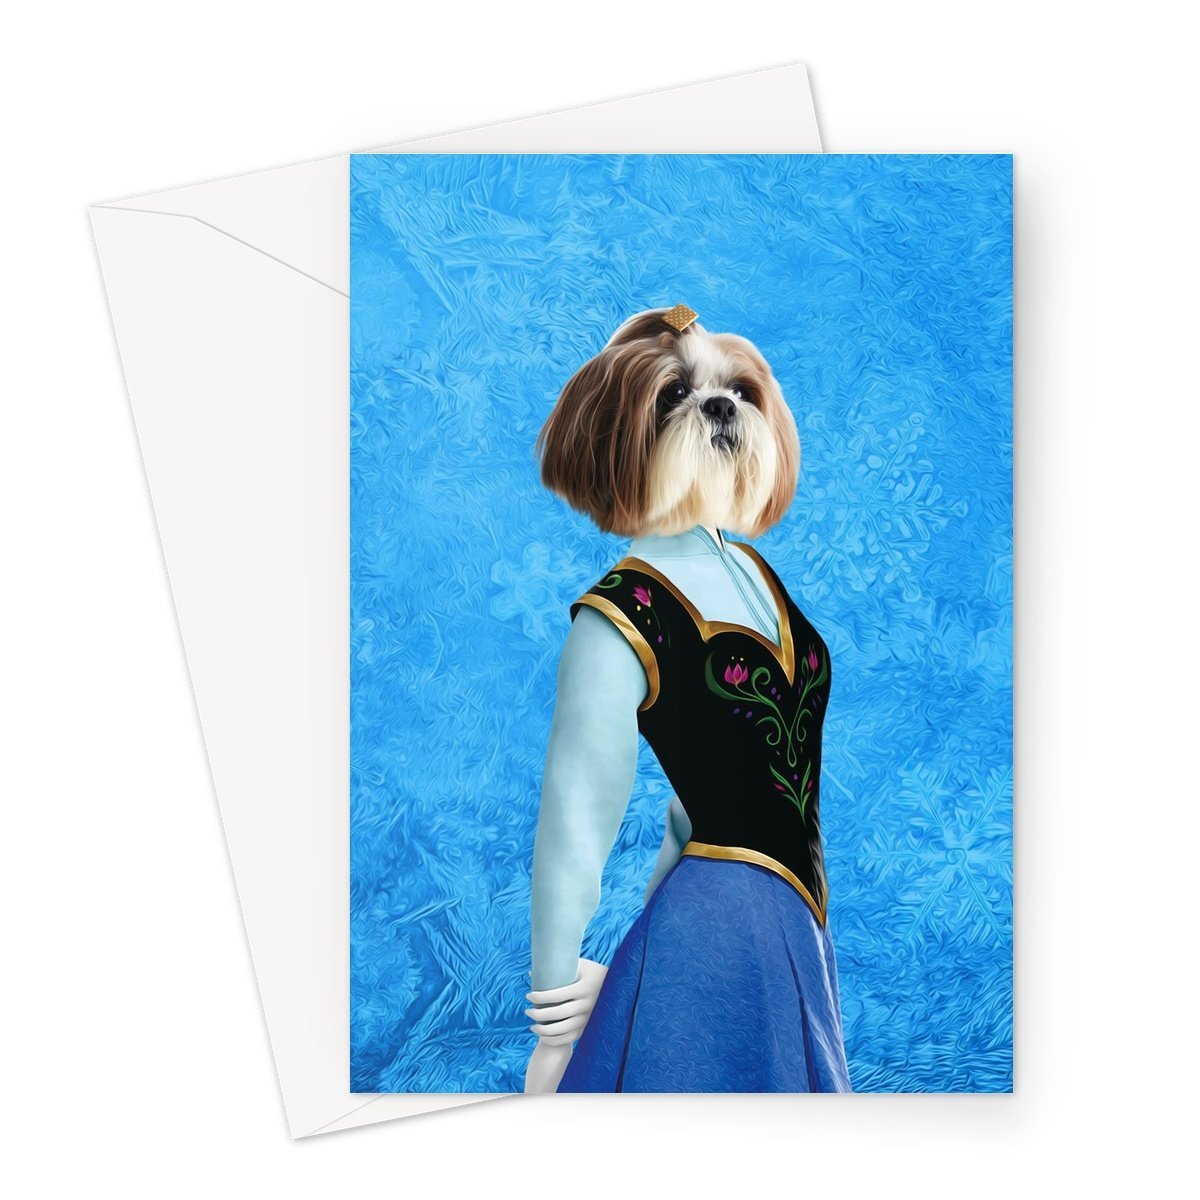 Ana (Frozen Inspired): Custom Pet Greeting Card - Paw & Glory ,pawandglory,for pet portraits, paintings of pets from photos, dog portraits admiral, pet portrait singapore, admiral pet portrait, minimal dog art, pet portraits